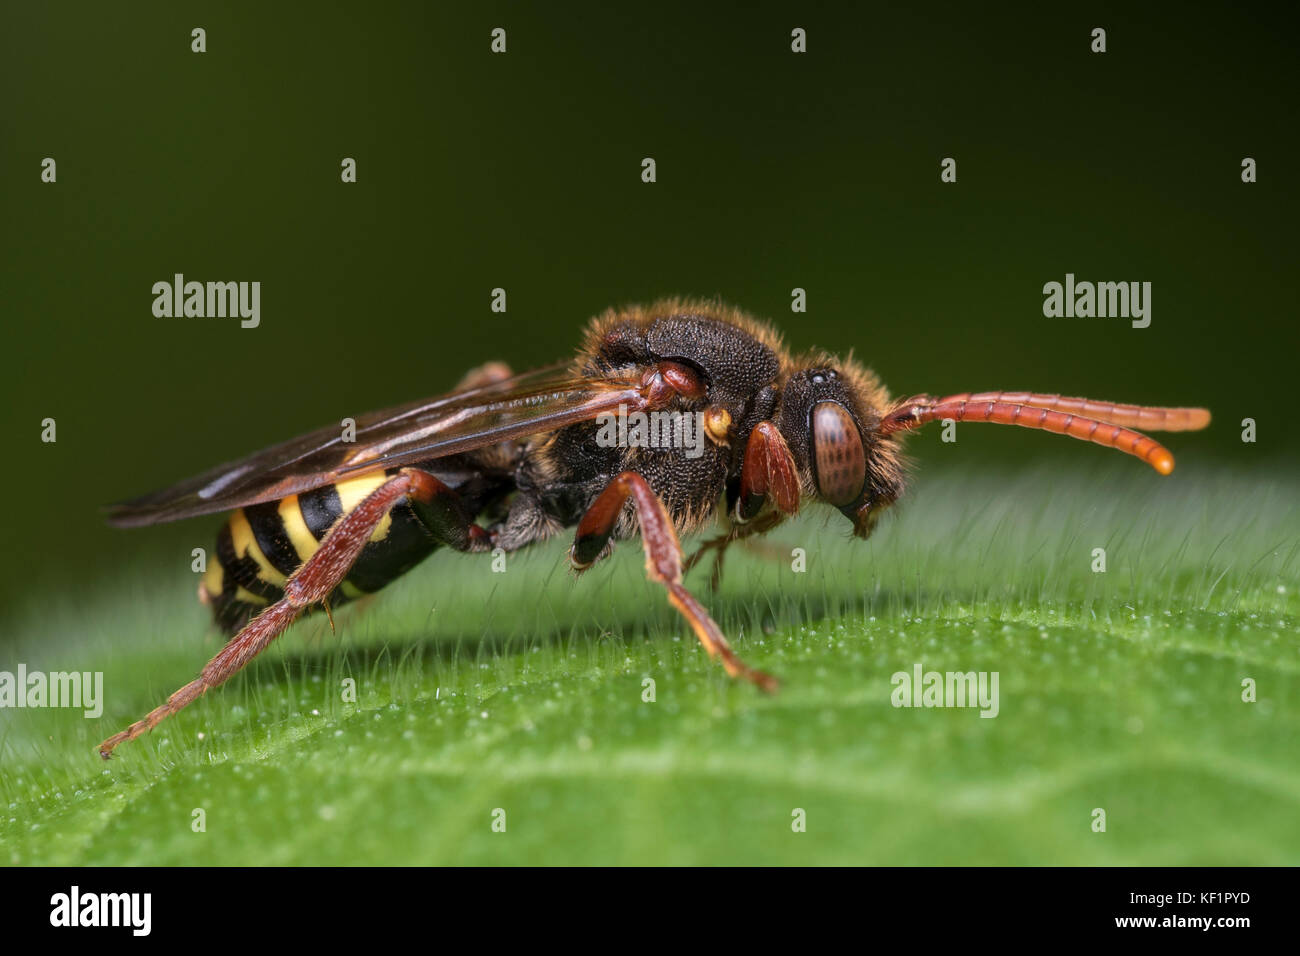 Cuckoo Bee resting on leaf. Tipperary, Ireland Stock Photo